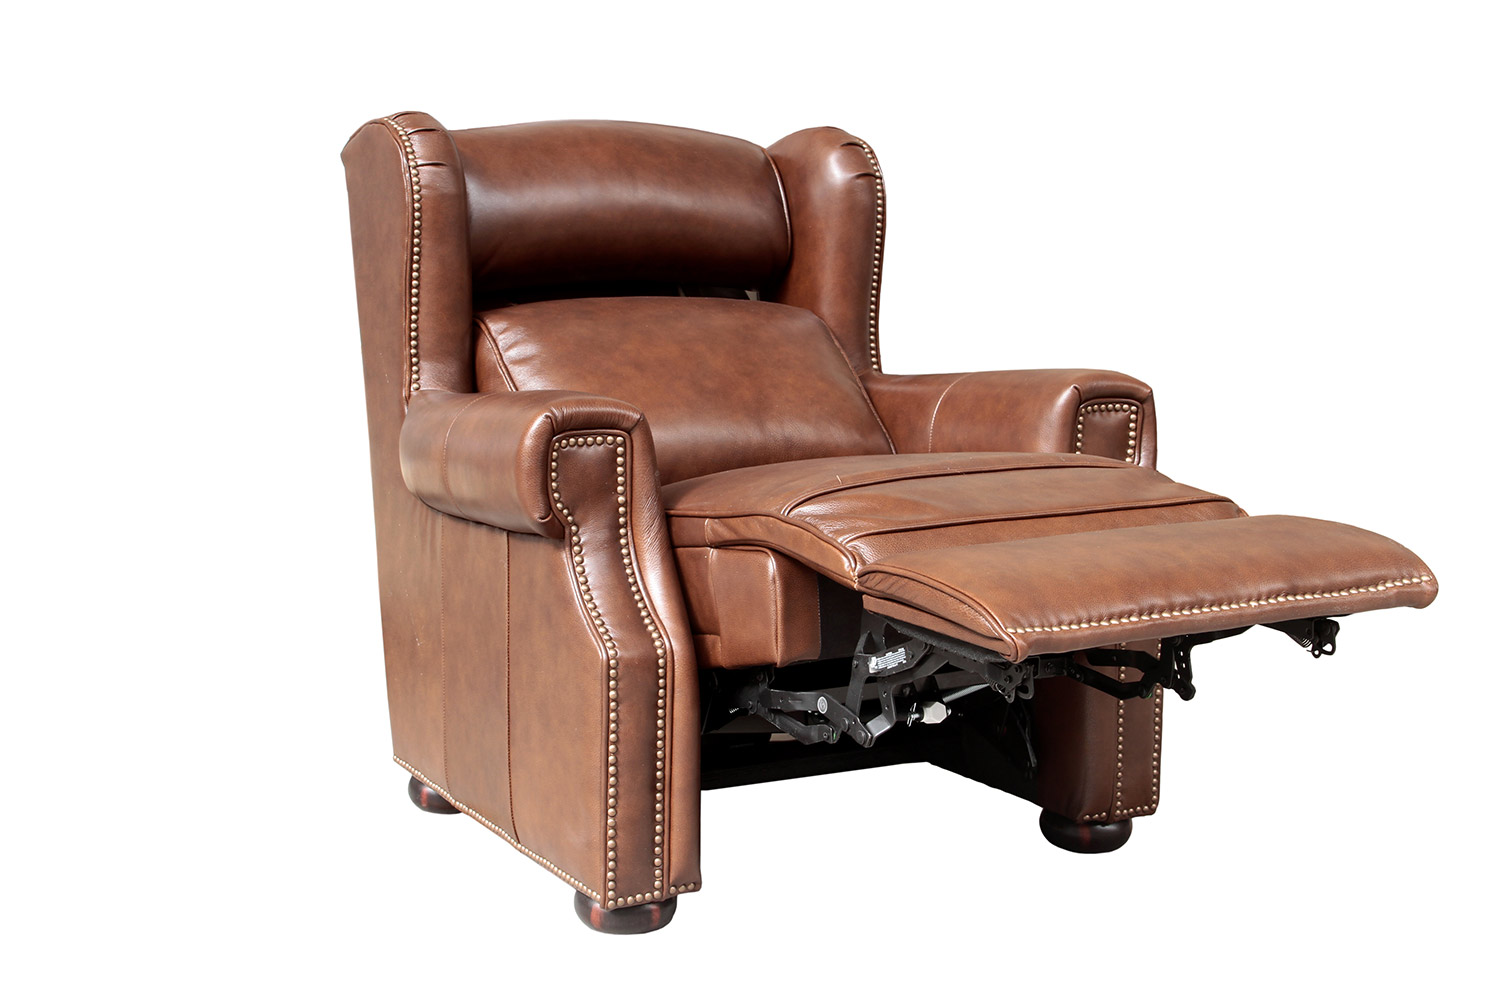 Barcalounger Benwick Power Recliner Chair with Power Head Rest - Shoreham Chocolate/All Leather